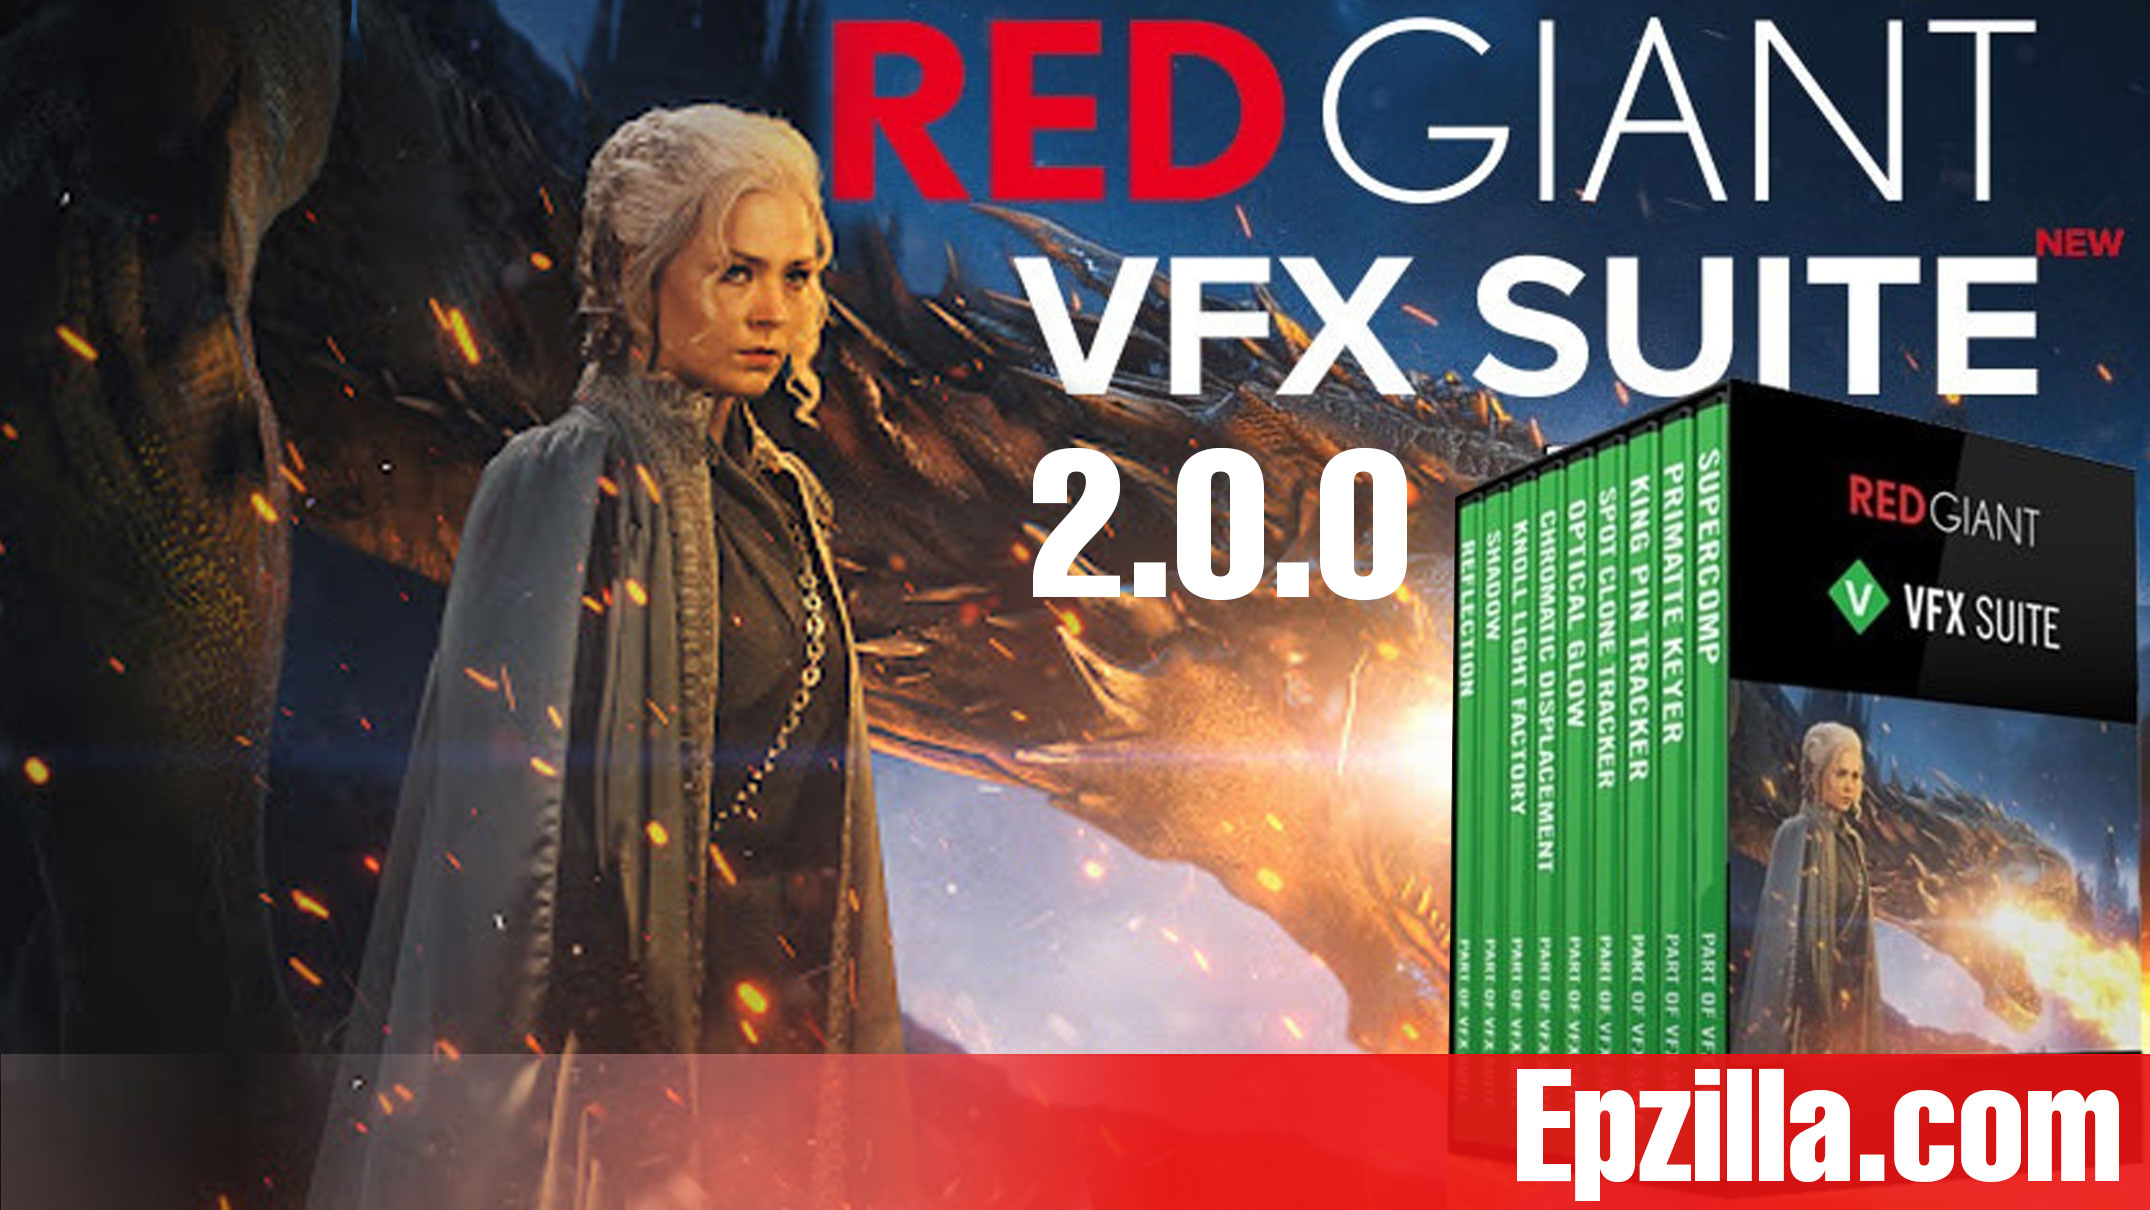 Red Giant VFX Suite 2.0.0 Free Download From Epzilla.com